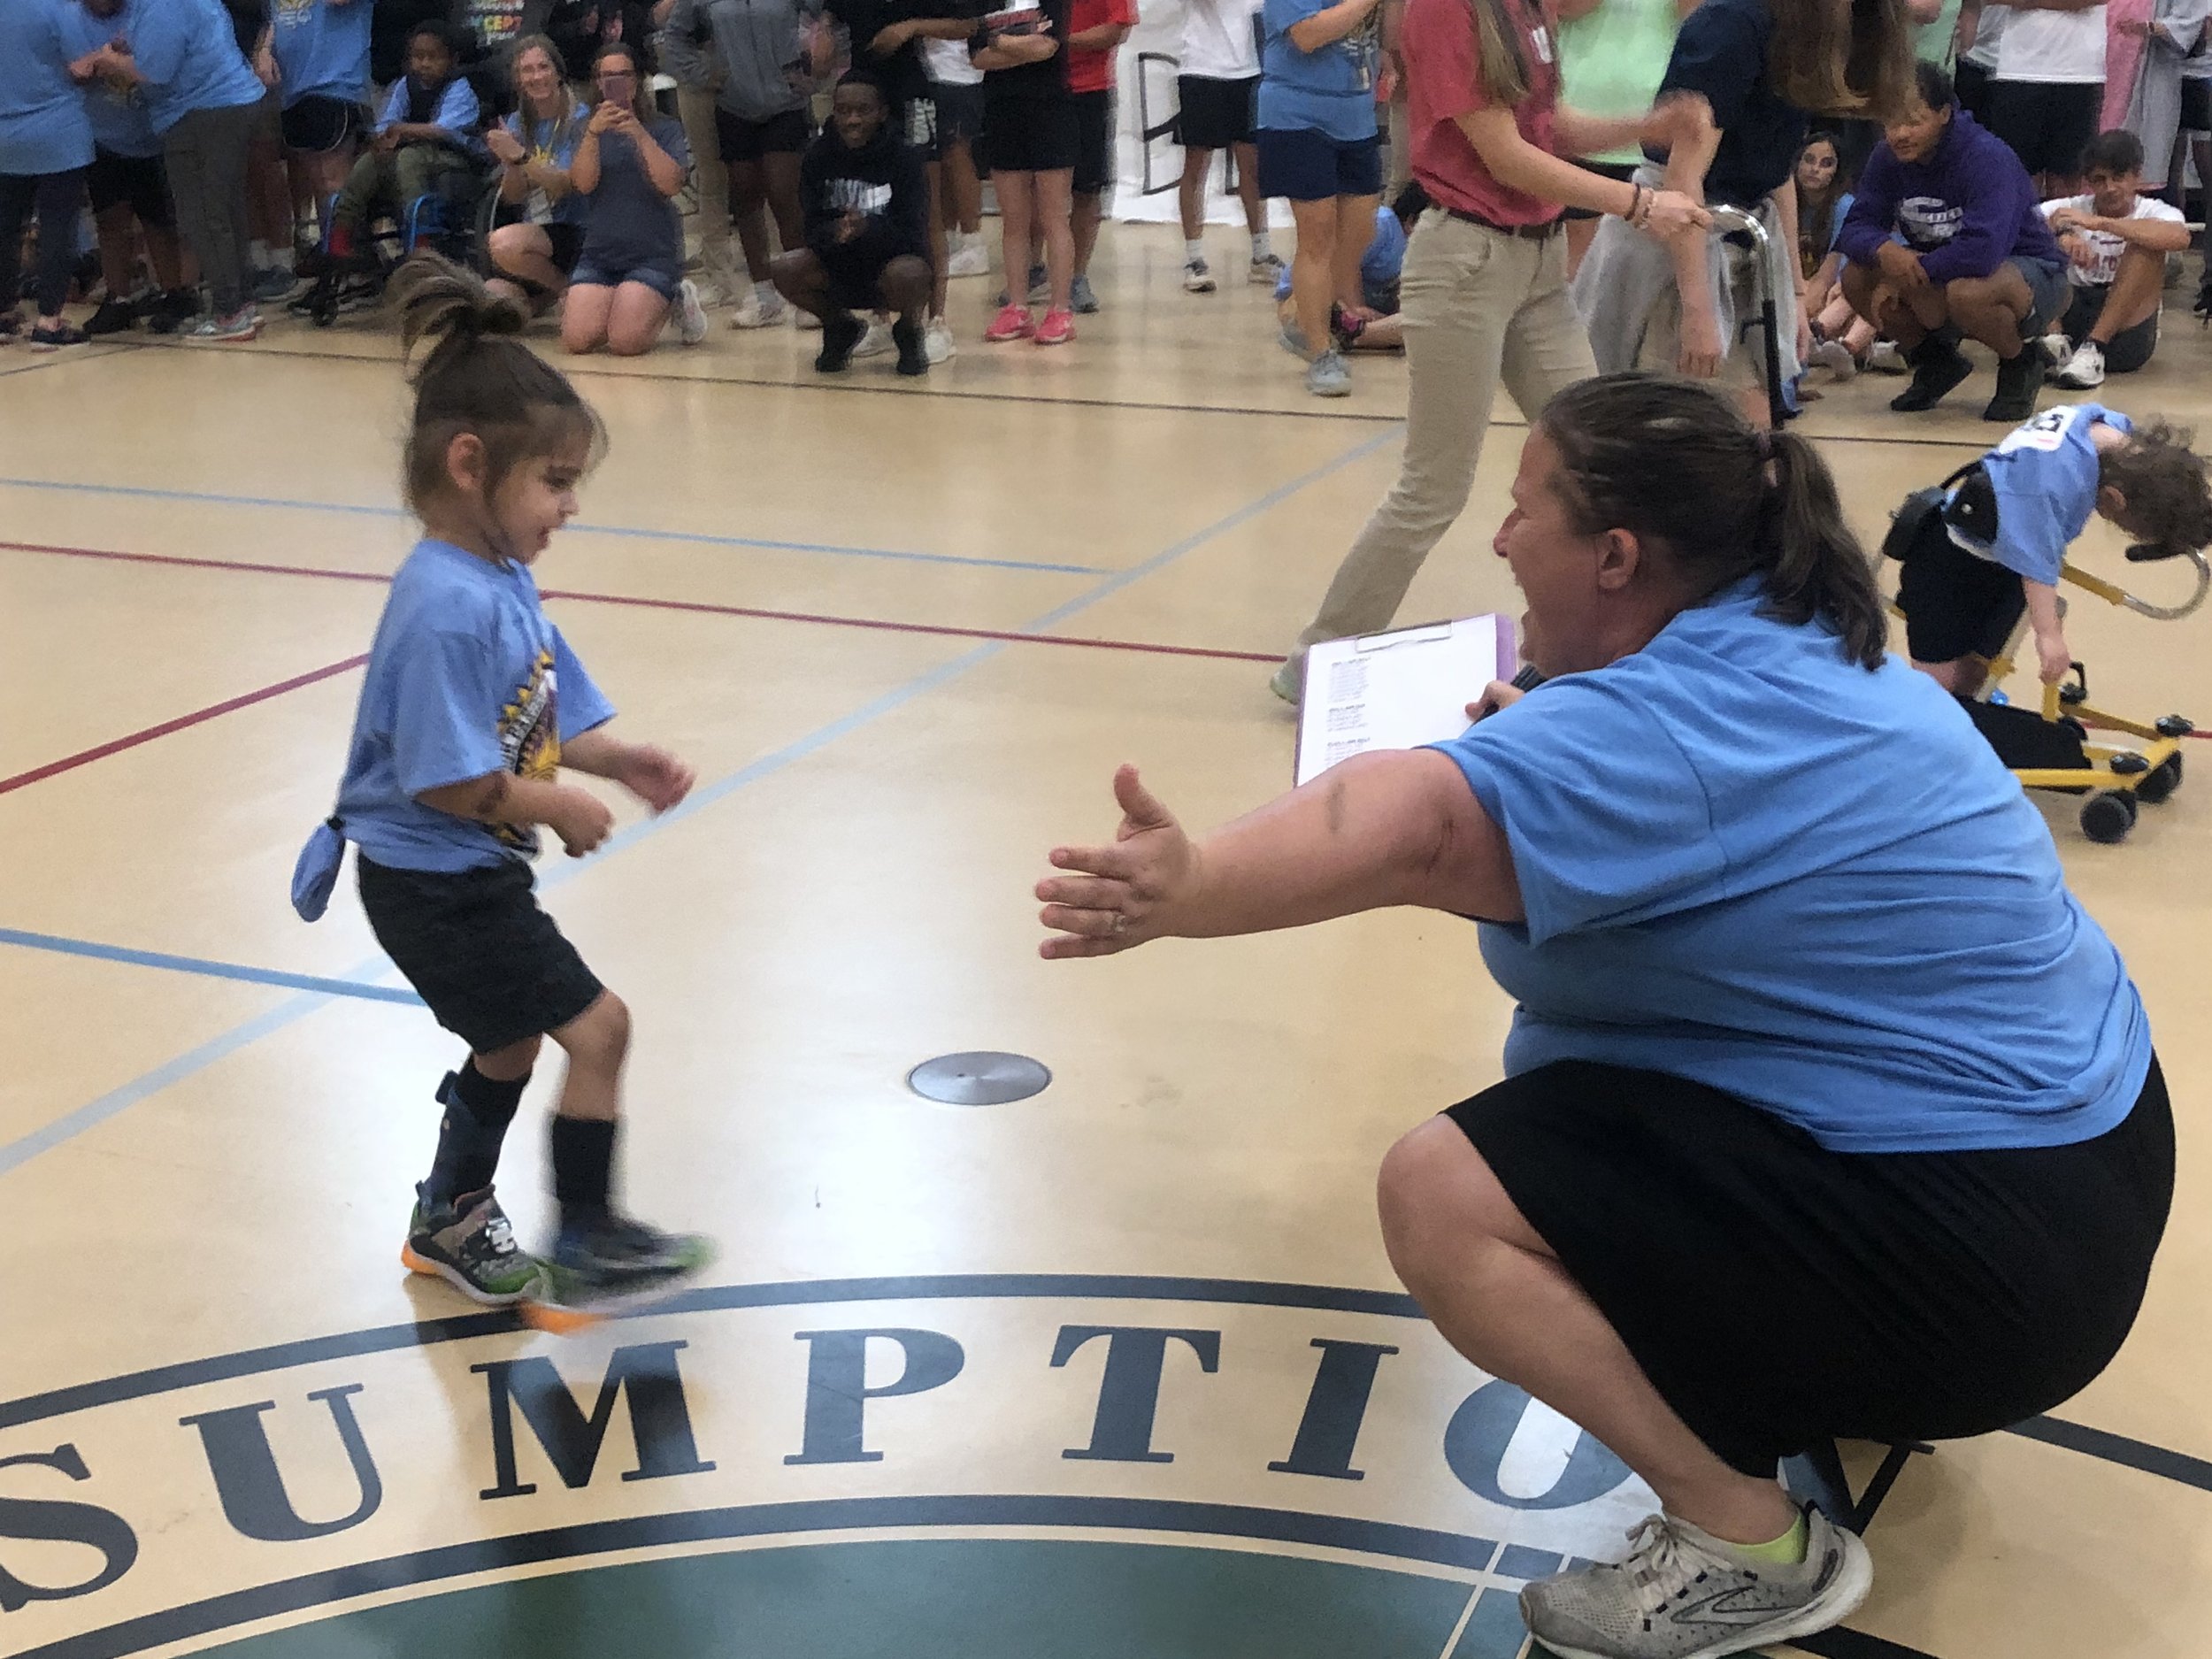  Assumption Parish Public Schools Special Olympic Athlete Killian Mabe races across the gym floor of the Assumption Parish Civic Center to be greeted by event coordinator and teacher Heather Templet. 